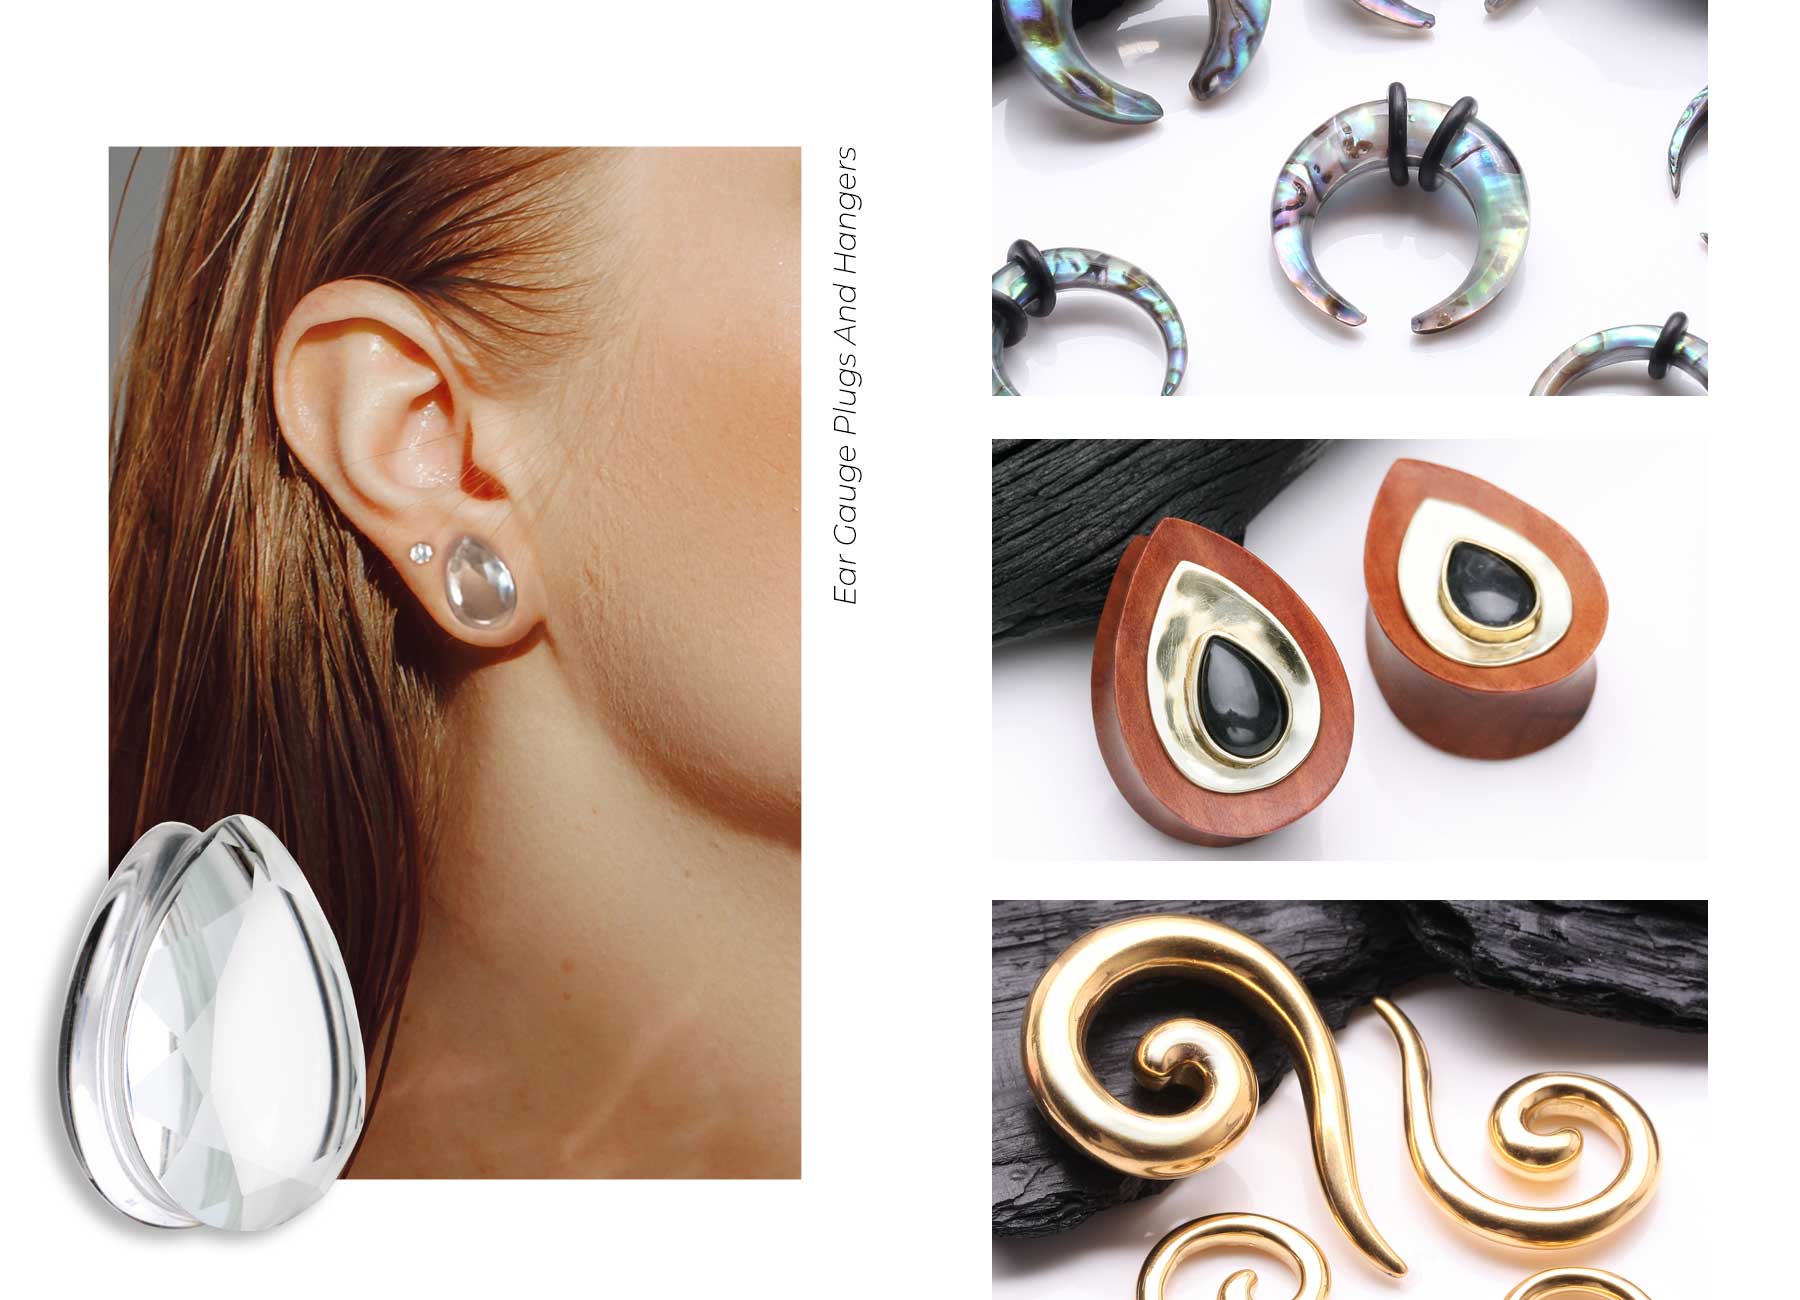 Body piercing jewelry including ear weights, ear hangers, and gauges for stretched ears